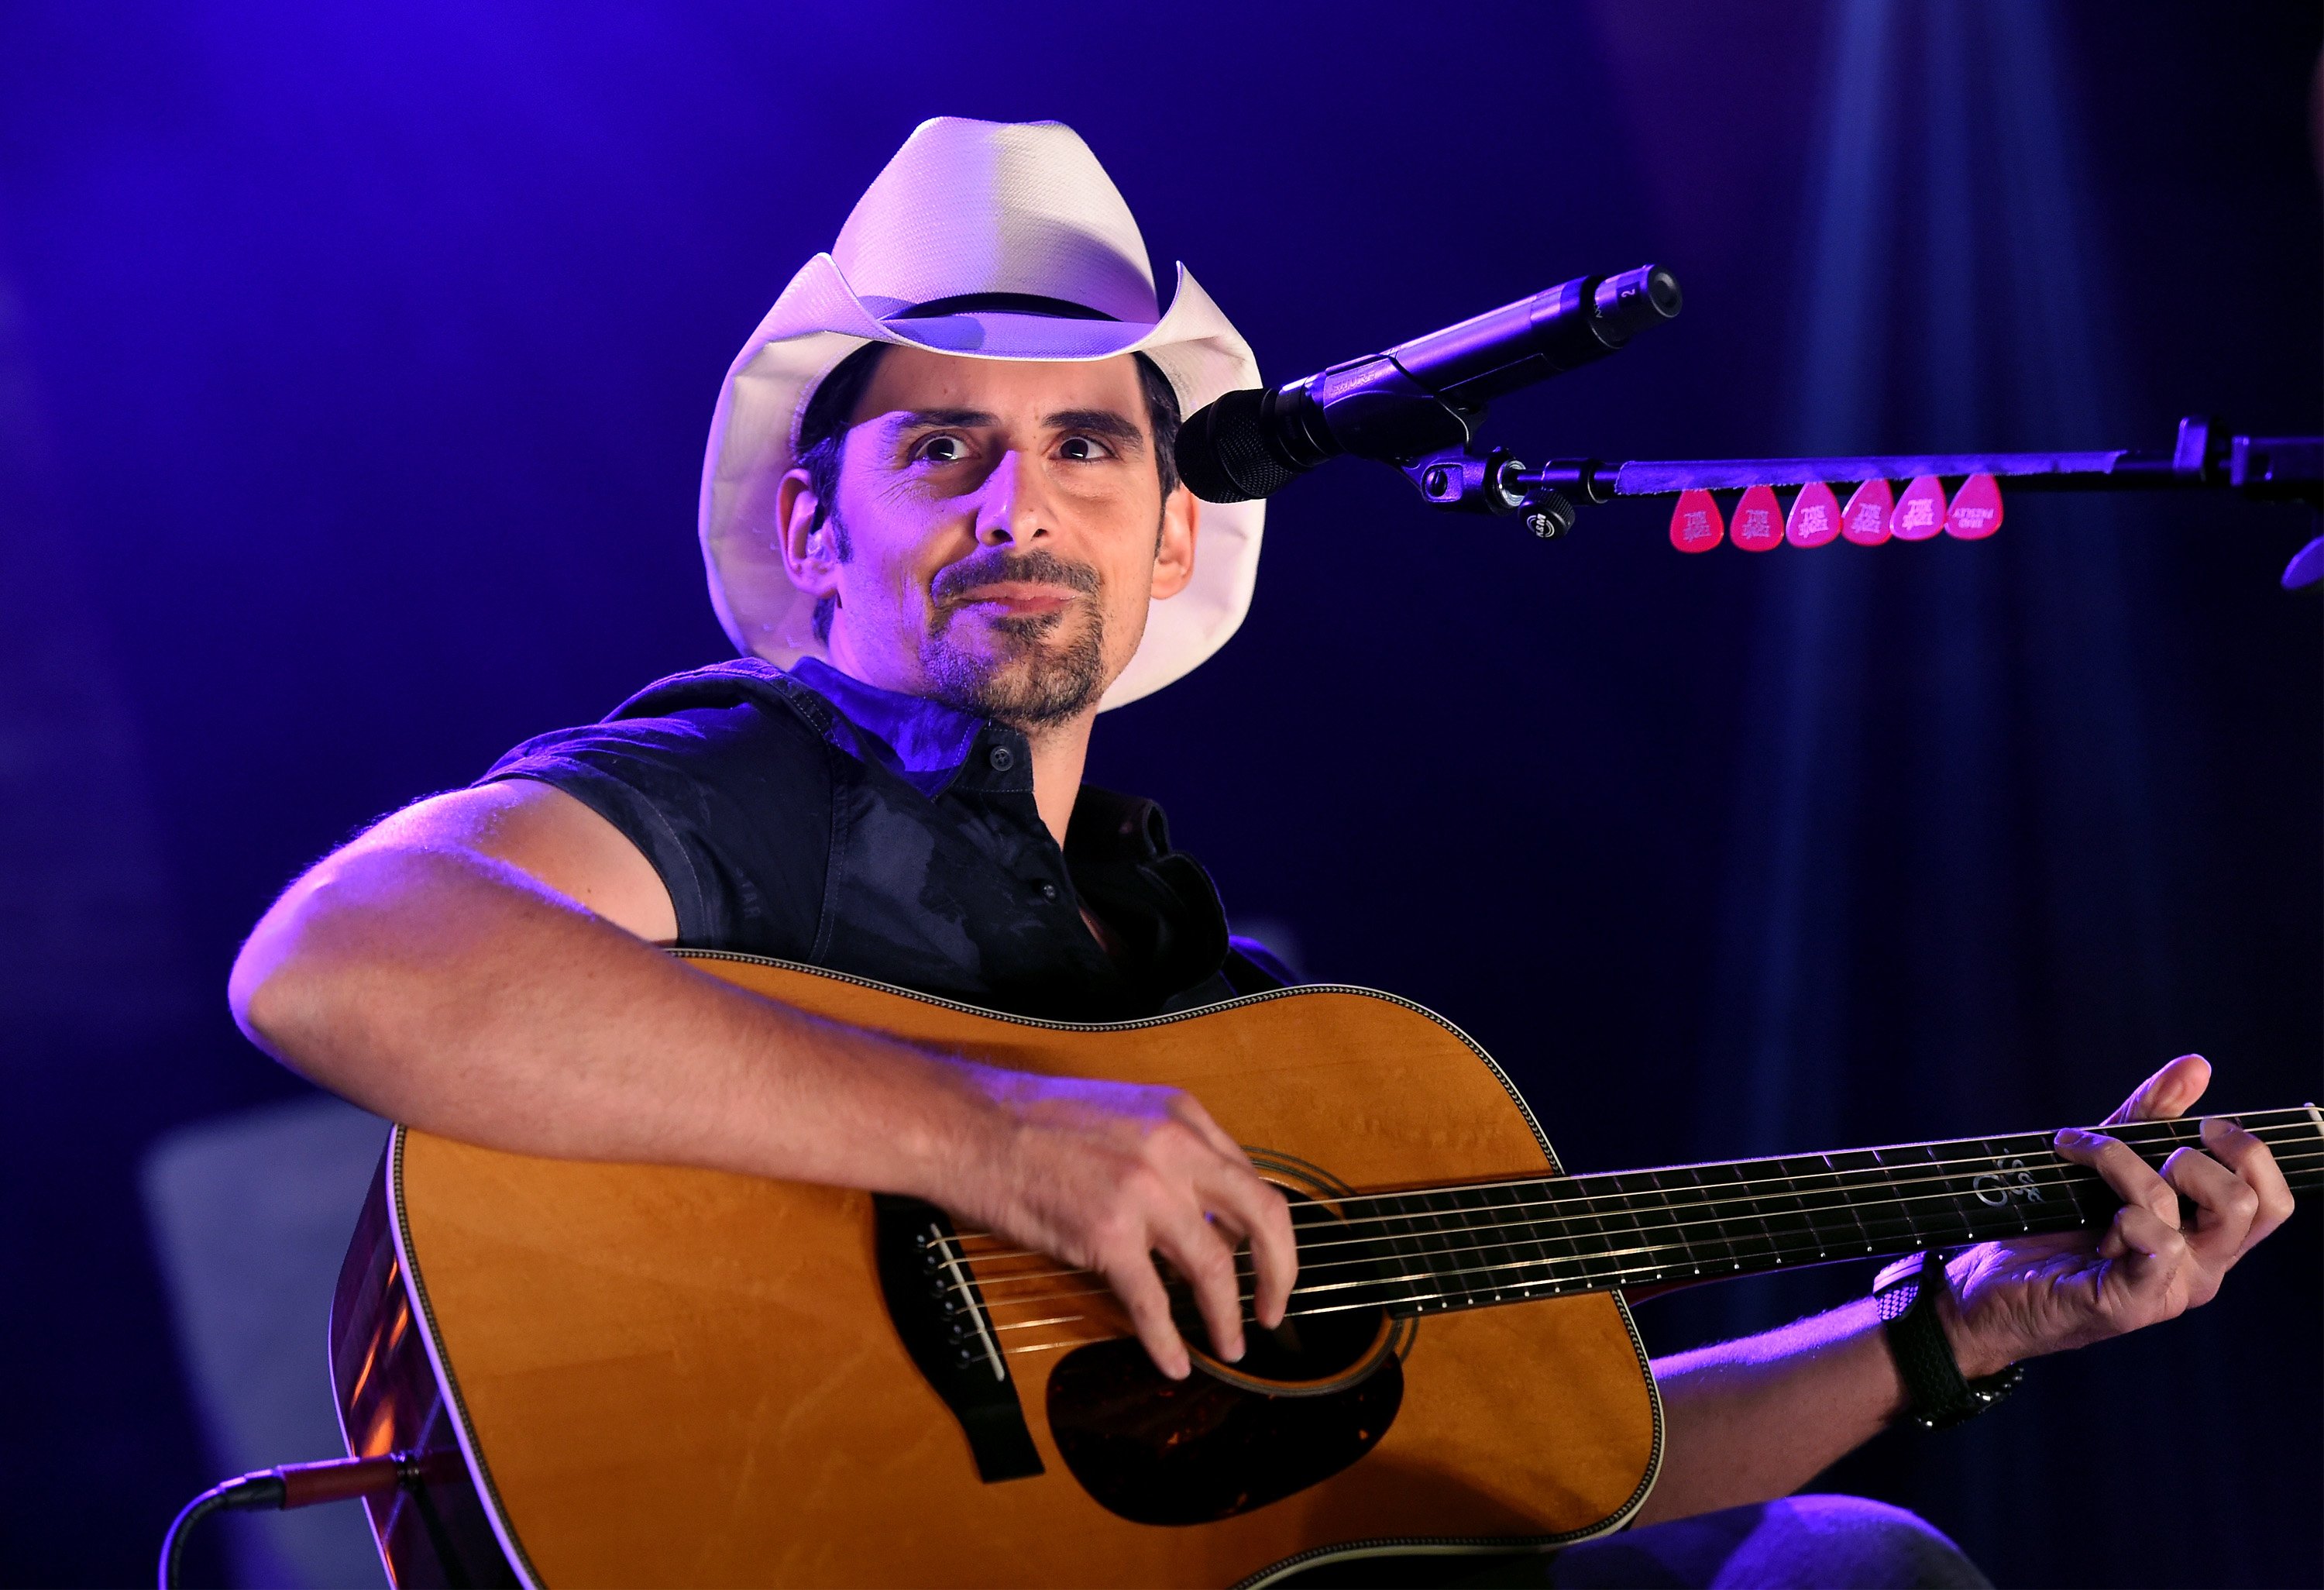 Brad Paisley performs at iHeartRadio Theater on November 11, 2016, in Burbank, California. | Source: Getty Images.